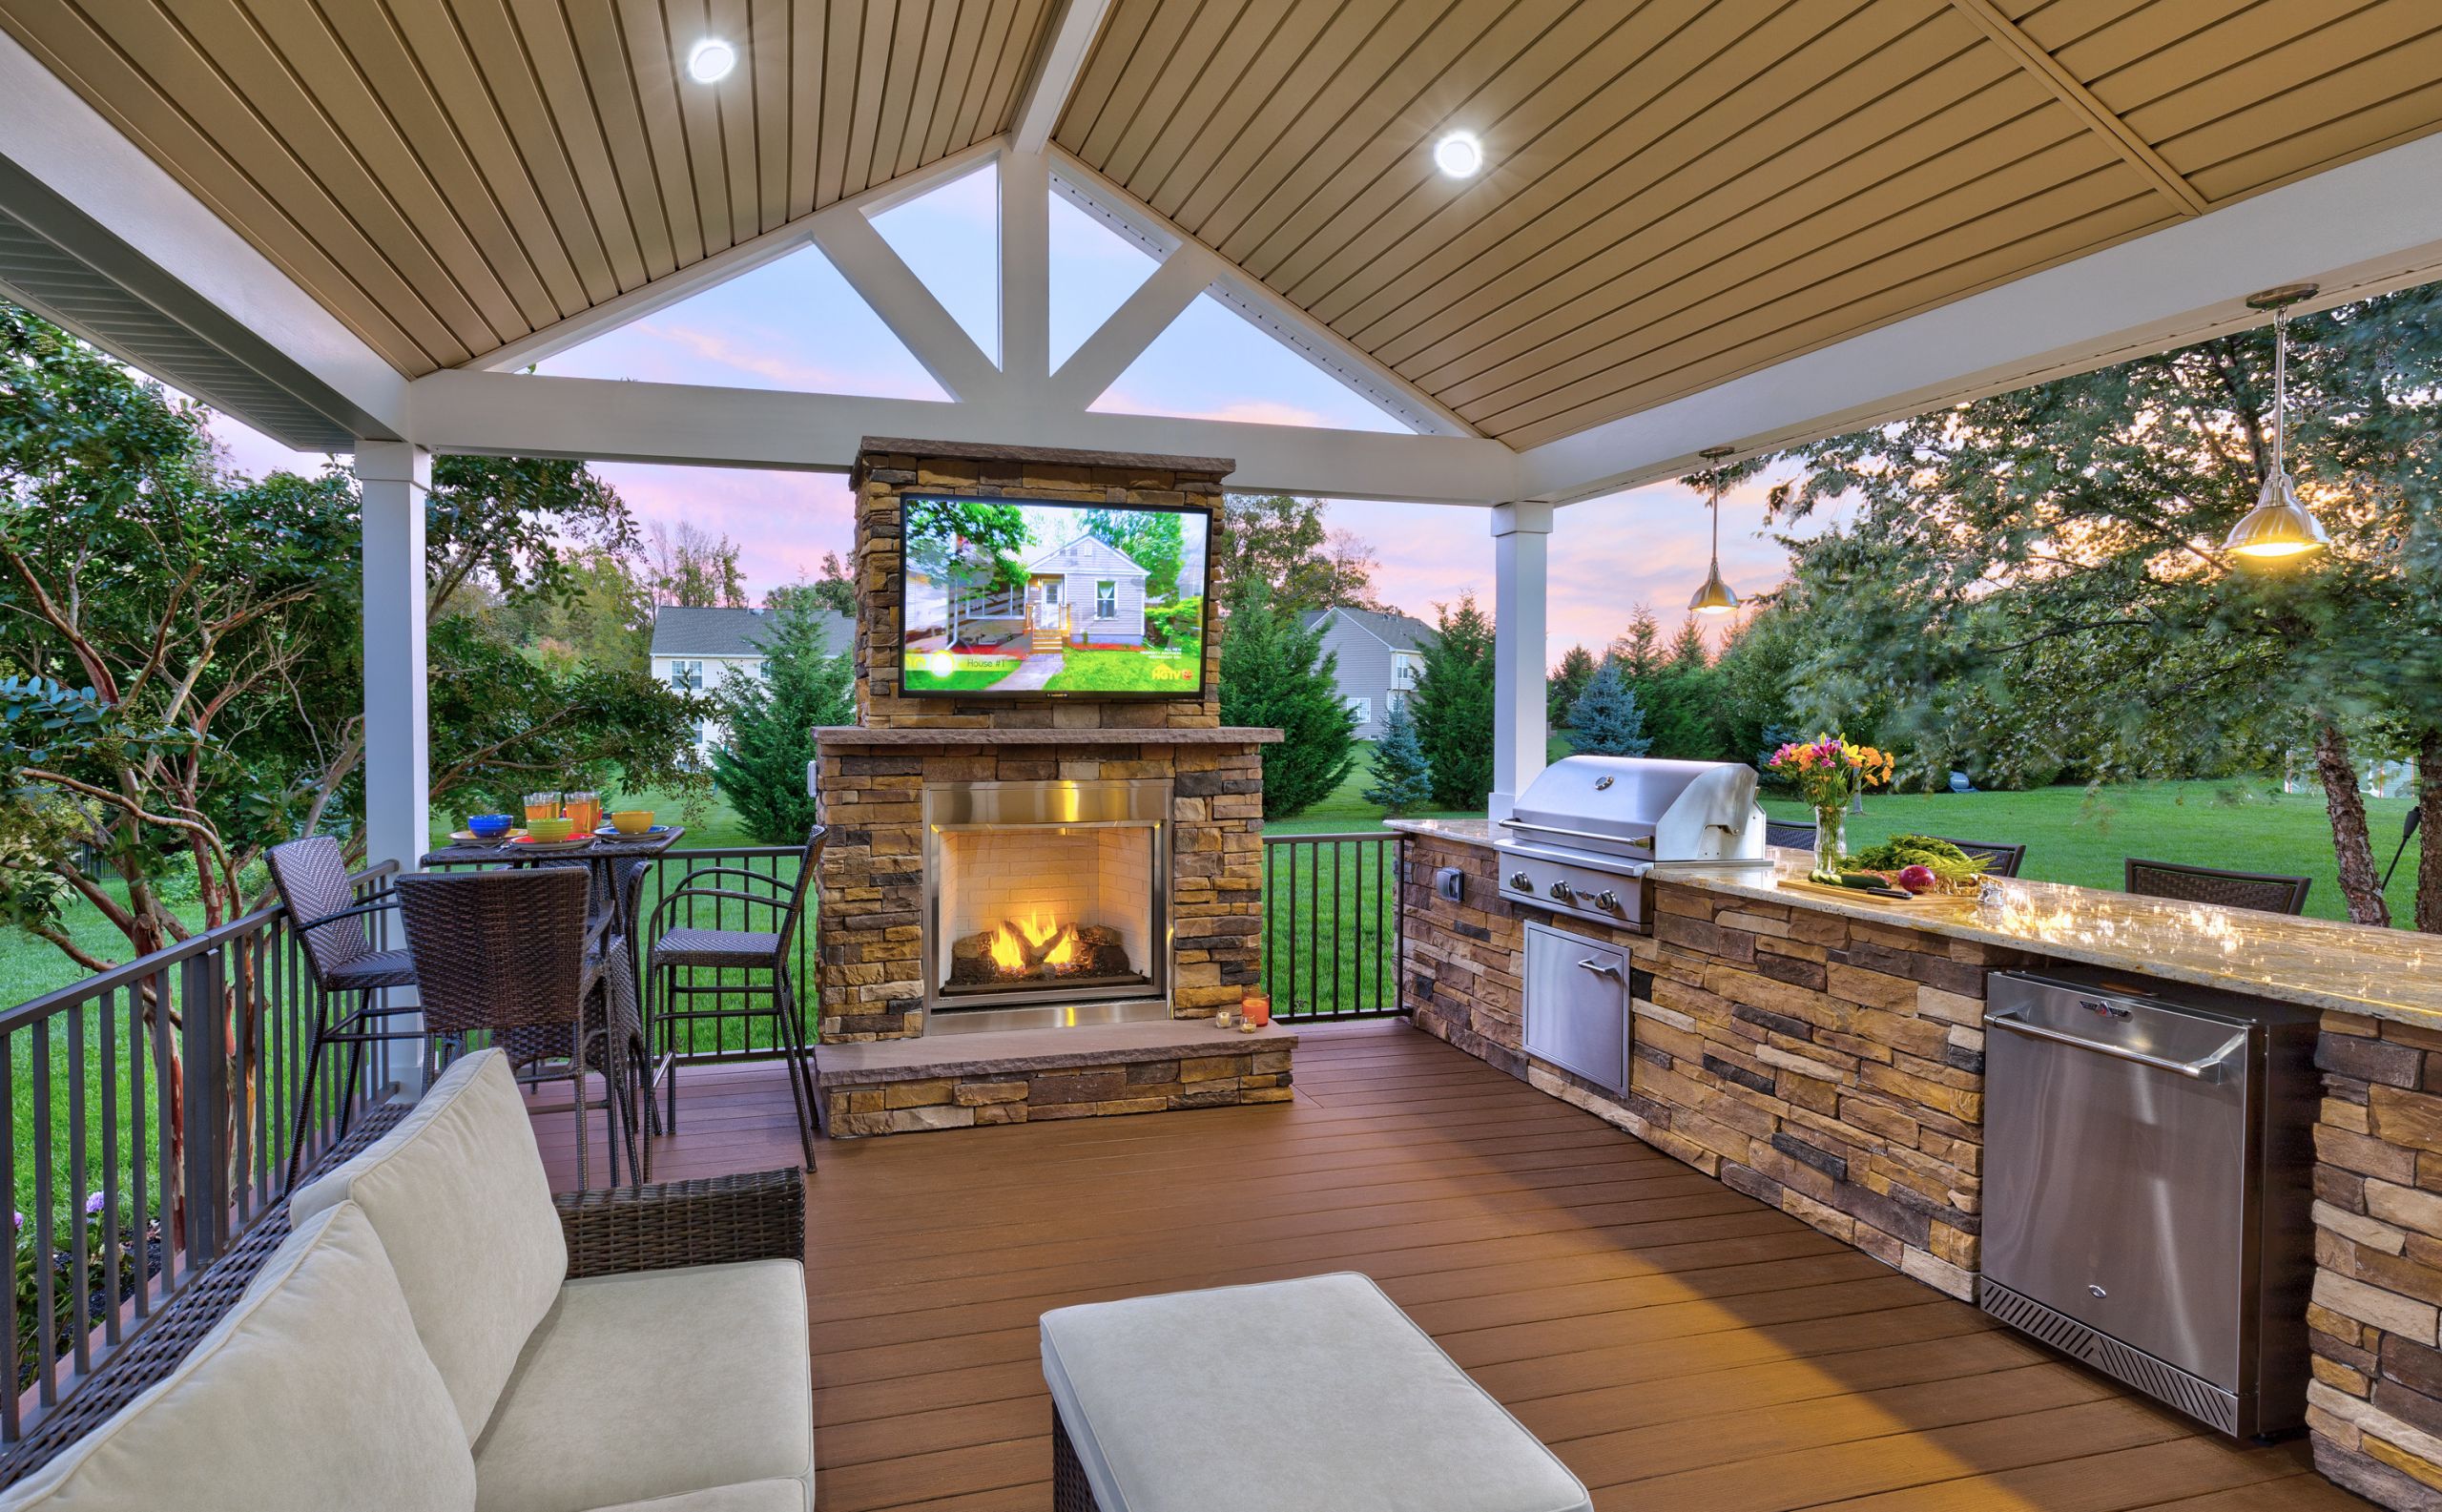 Outdoor Kitchen Fireplace
 Outdoor Fire Pit Designers Delaware